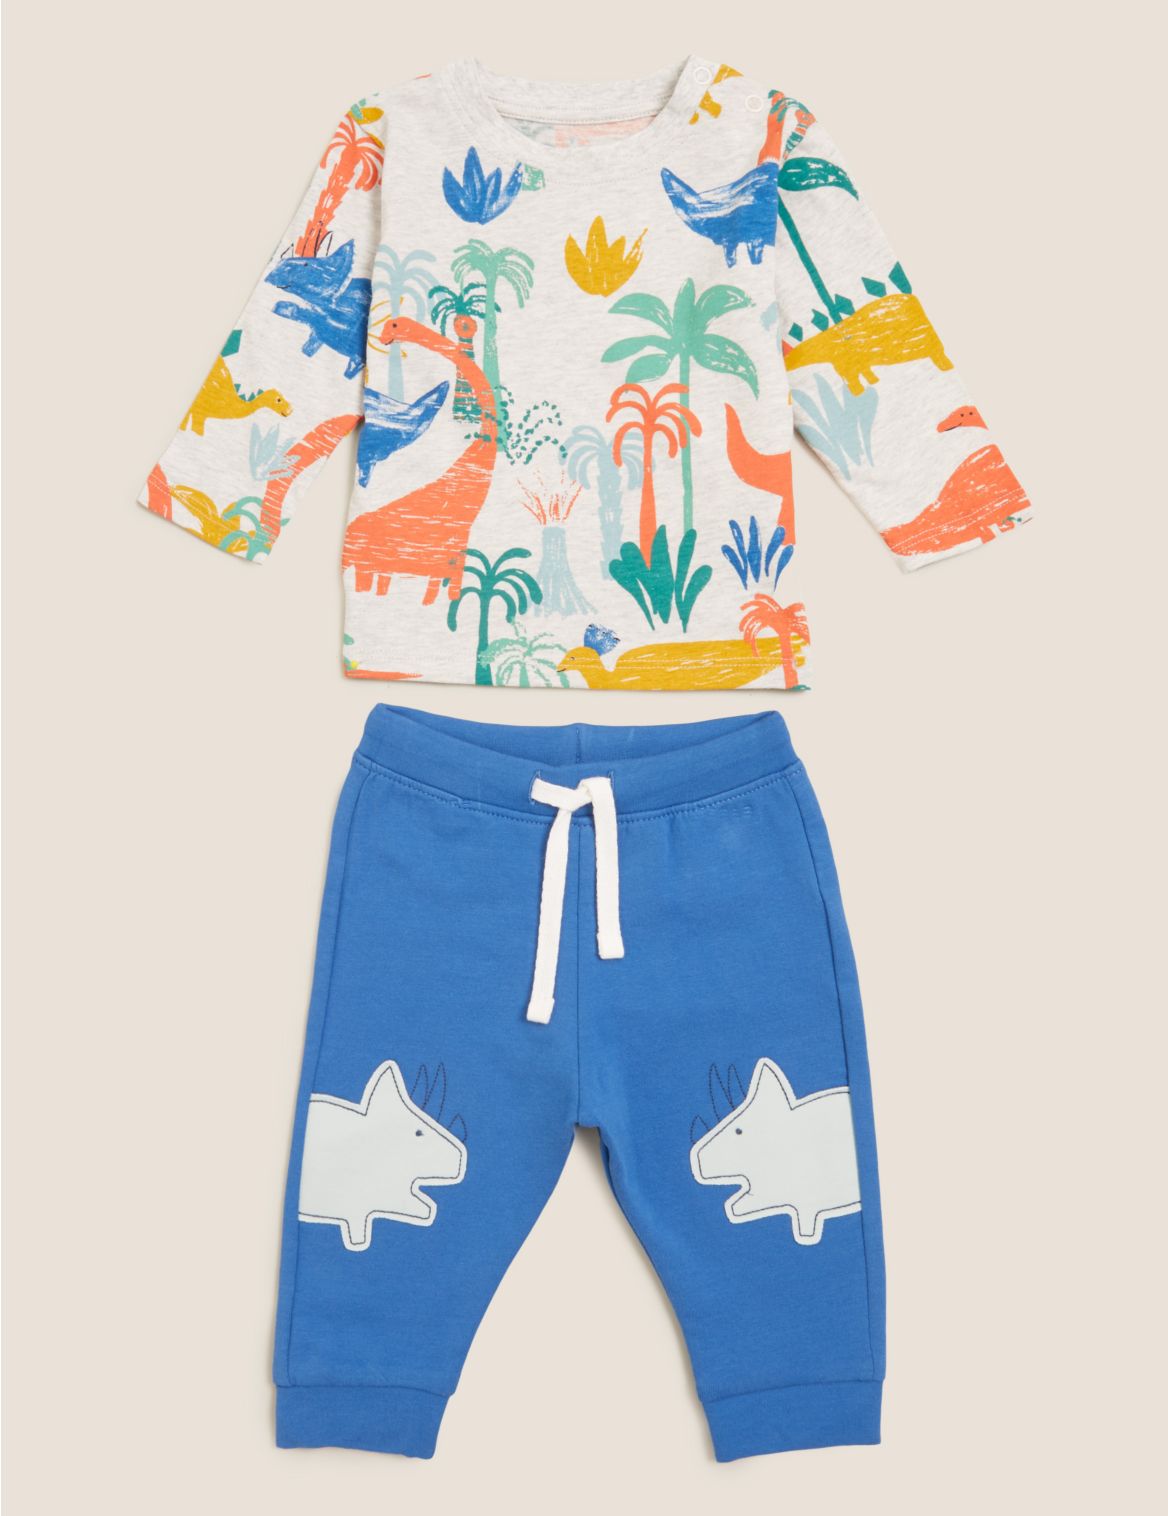 2pc Cotton Dinosaur Outfit (0-3 Yrs) blue